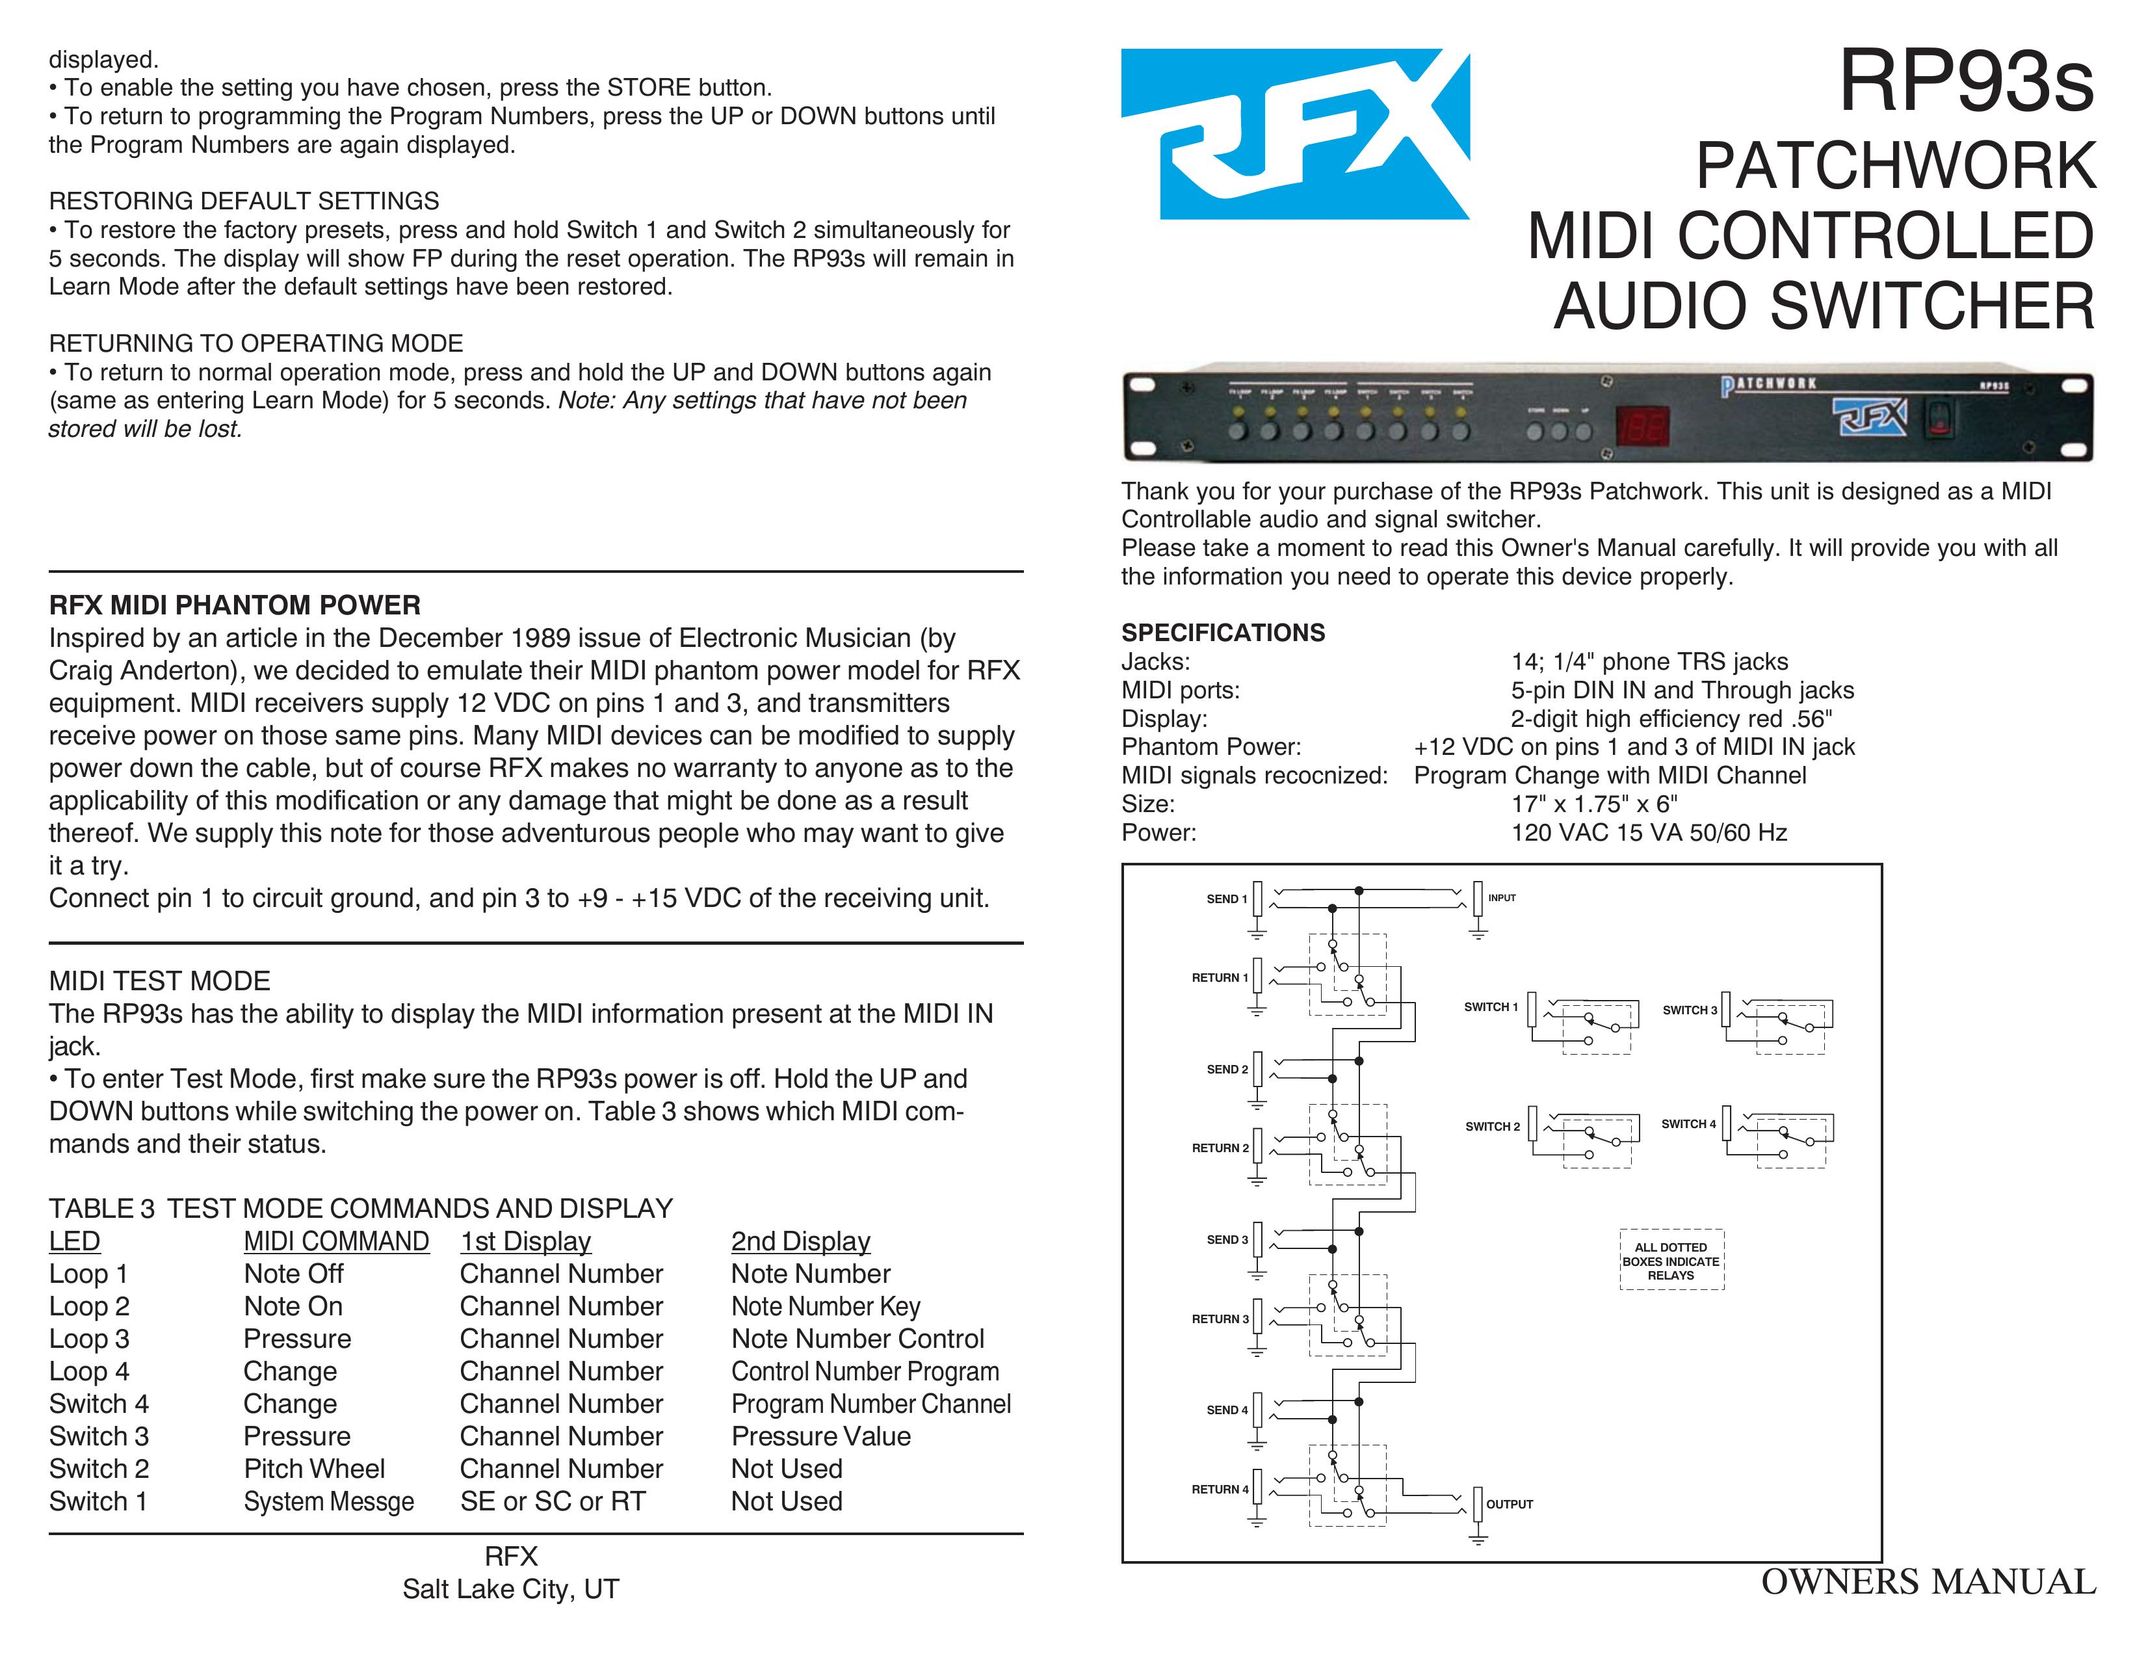 Rolls RP93s Switch User Manual